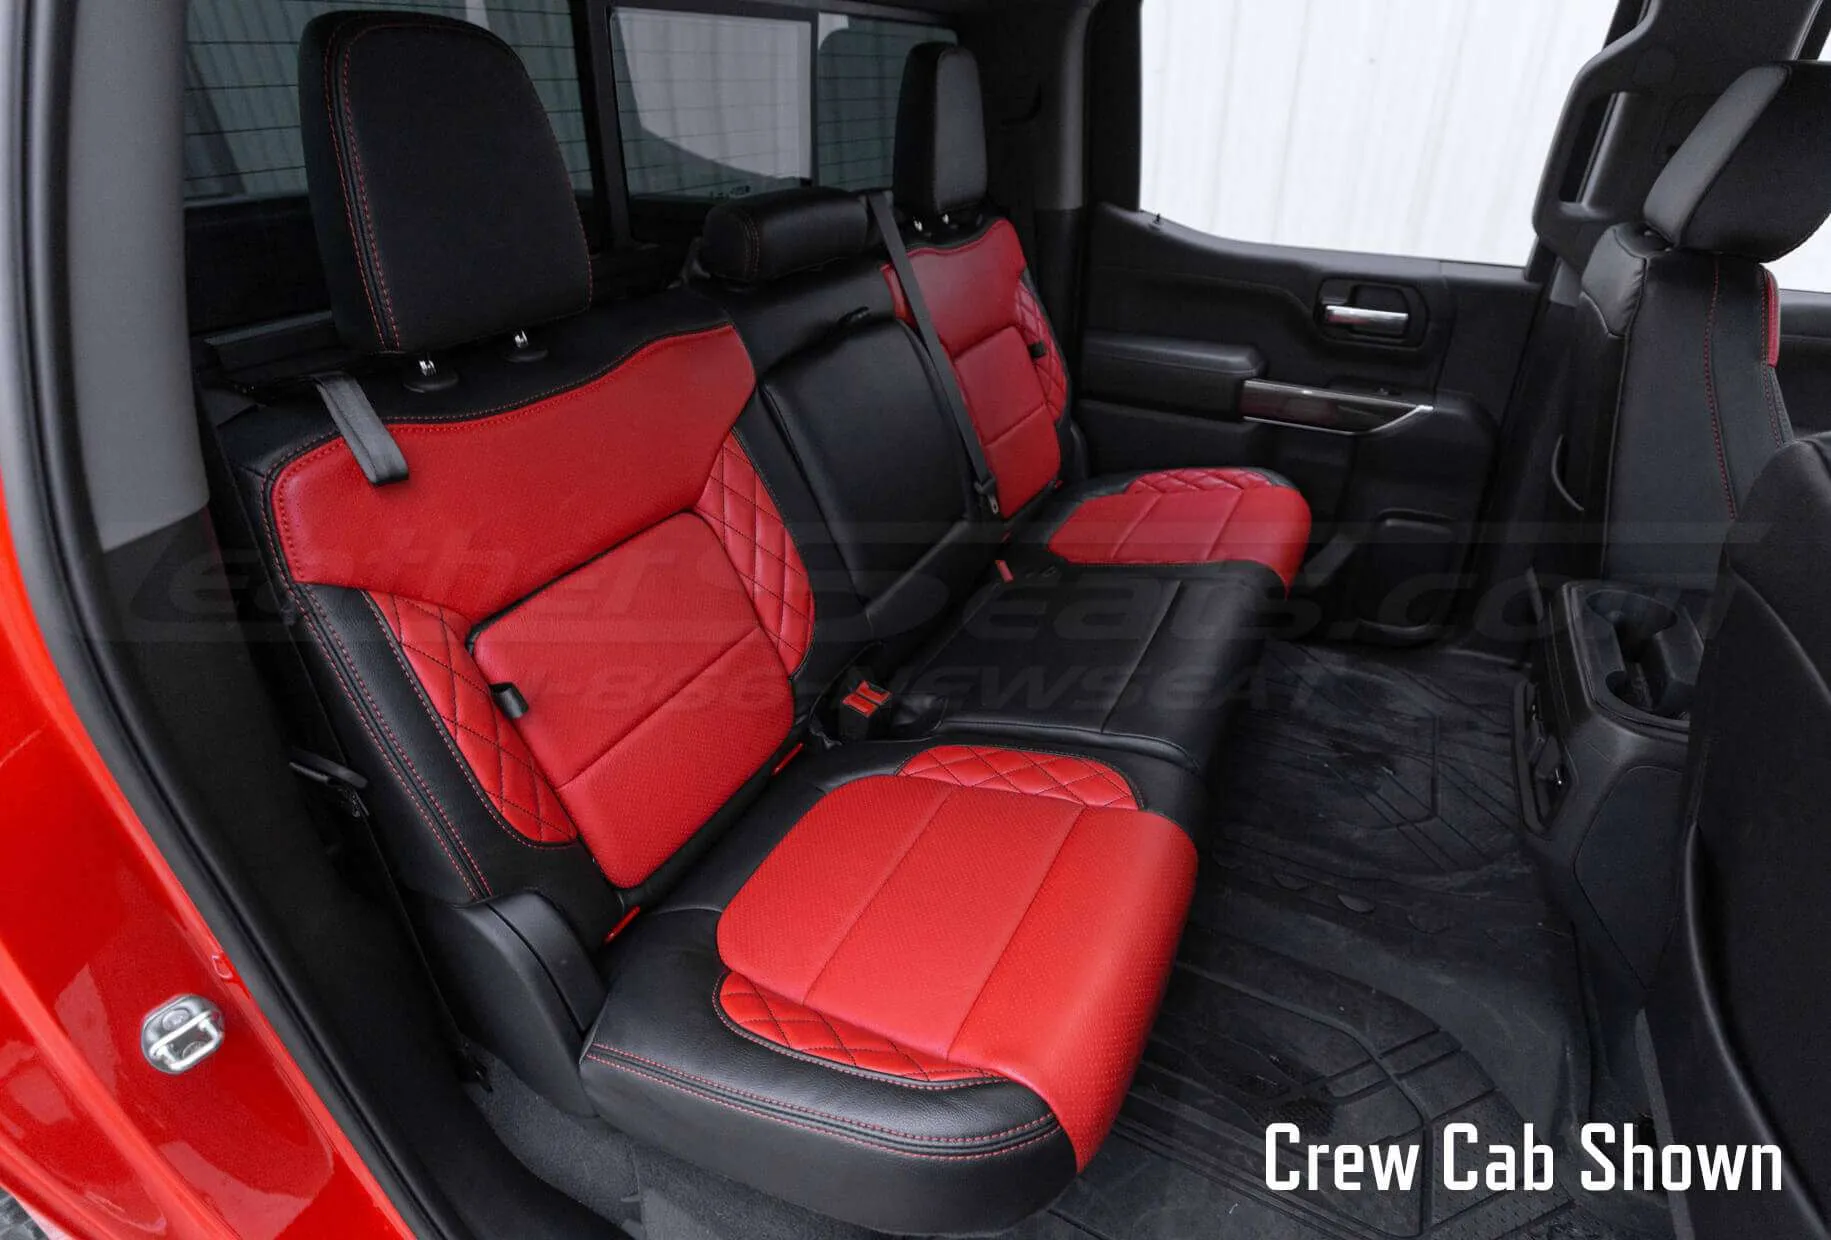 2019-2021 Chevrolet Silverado CNC Stitched Leather Seats - Rear seating from passenger side